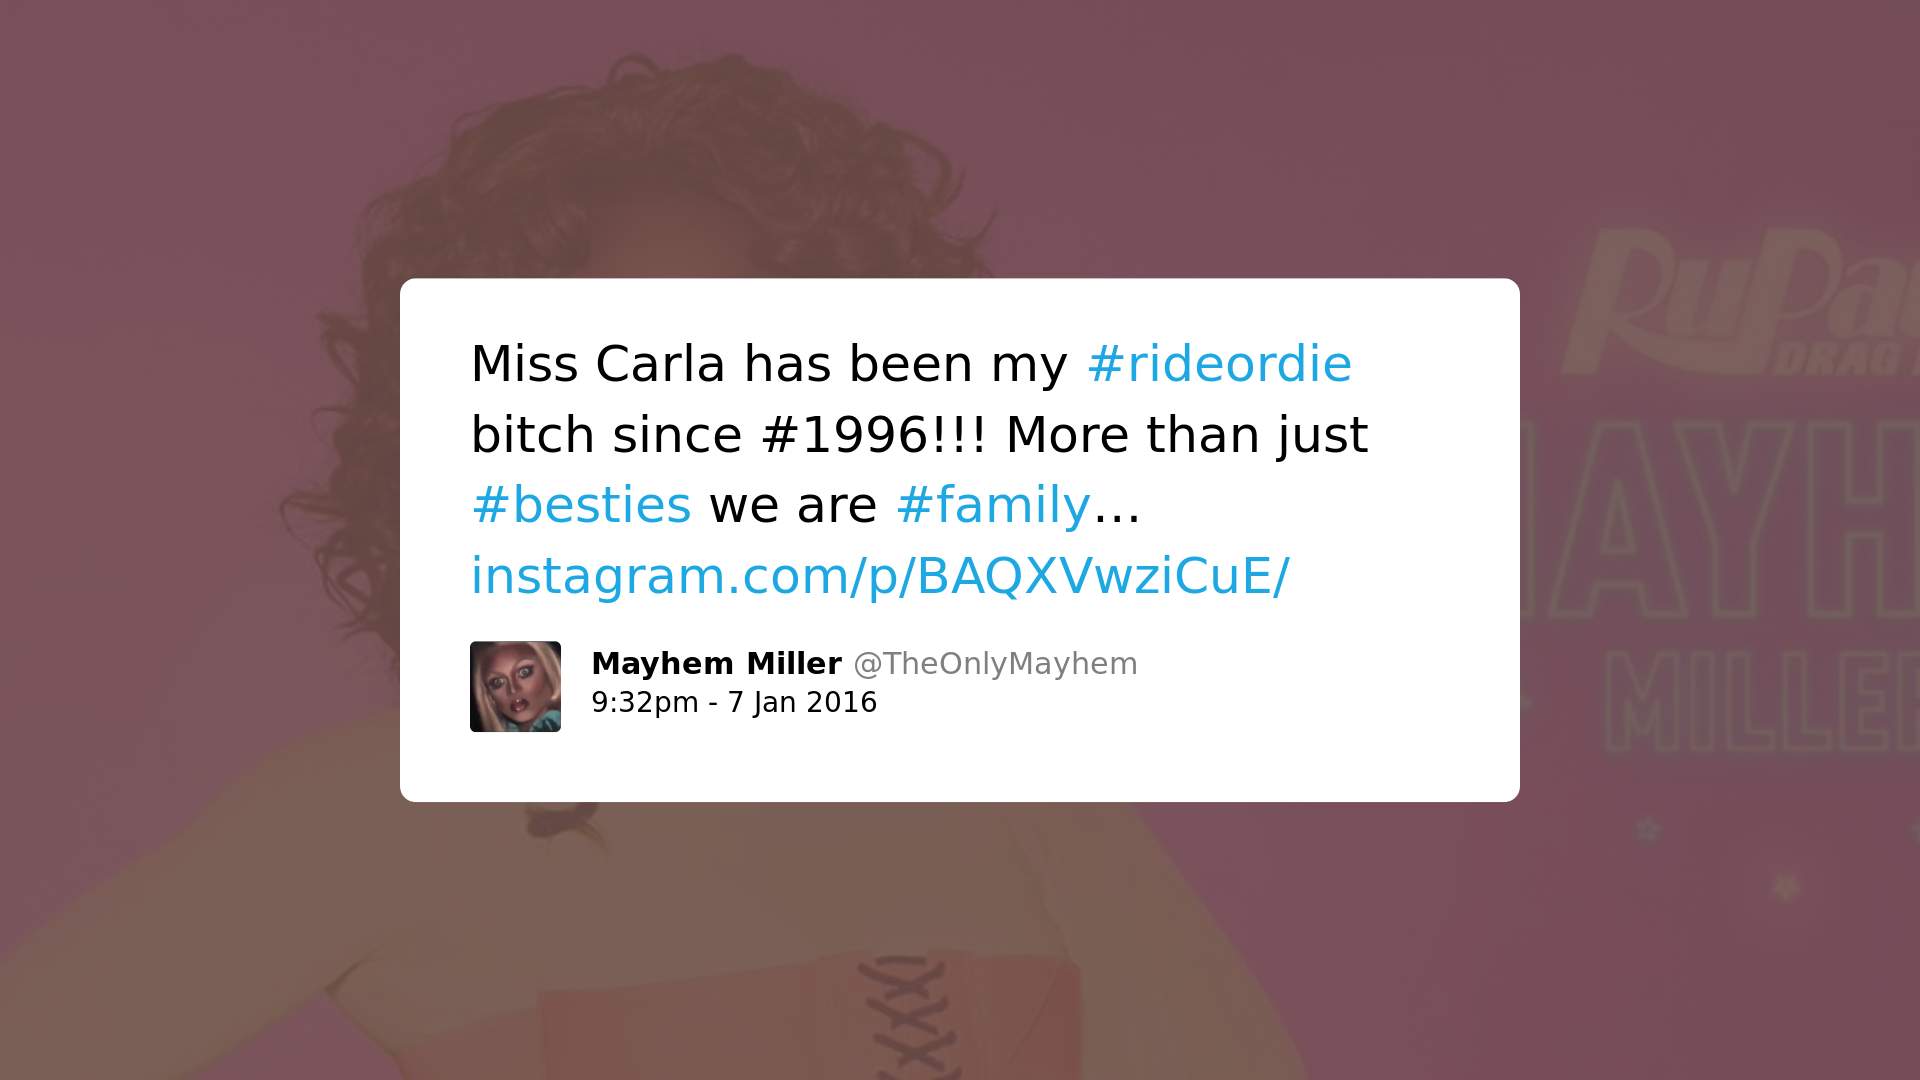 Print screen de postagem de Mayhem Miller com o texto: Miss Carla has been my #rideordie bitch since #1996!!! More than just #besties we are #family. 